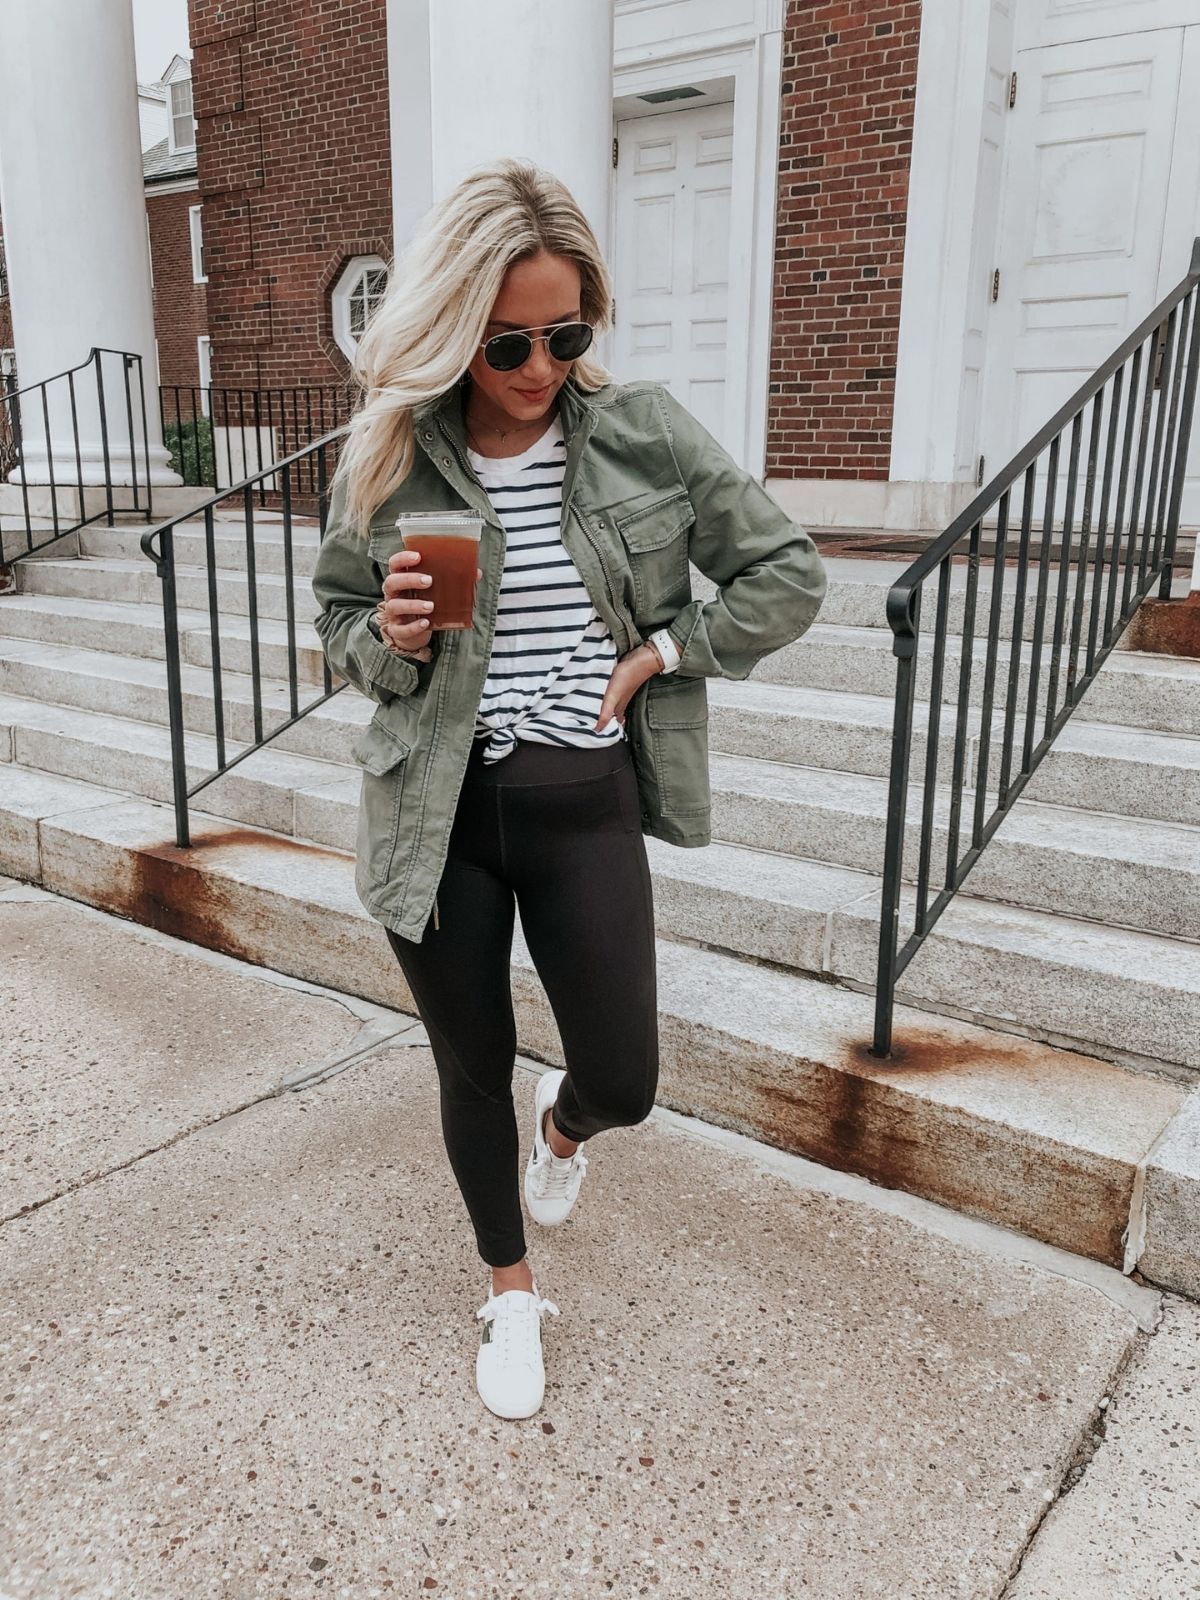 Fall Jacket Outfit Ideas for
  Women